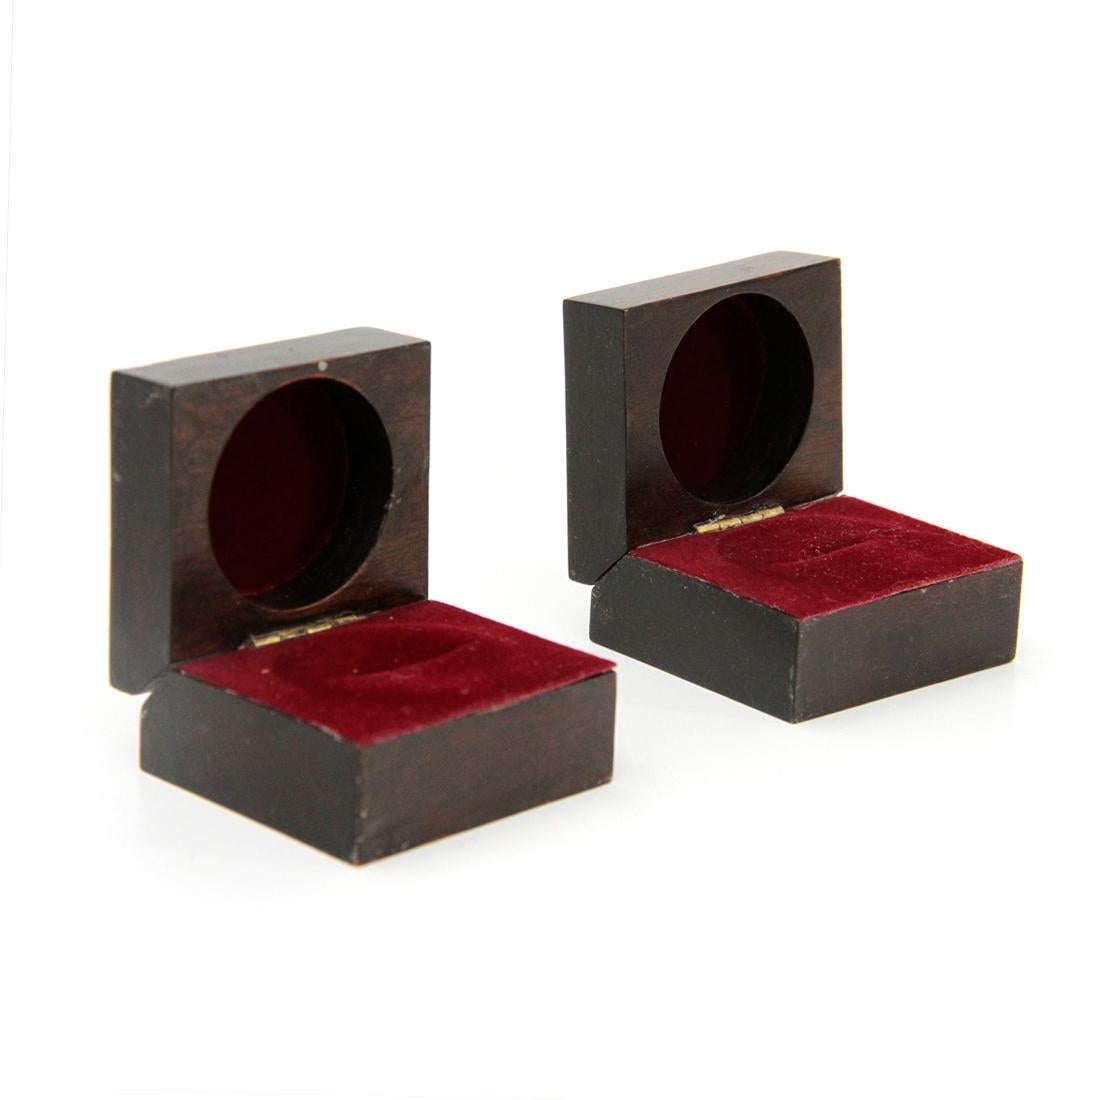 Pair of Italian-made wedding ring boxes produced in the 1950s.
Solid wood structure.
Burgundy velvet lined interior.
Good general conditions, some signs due to normal use over time.

Dimensions: Length 5 cm, depth 5 cm, height 4 cm.